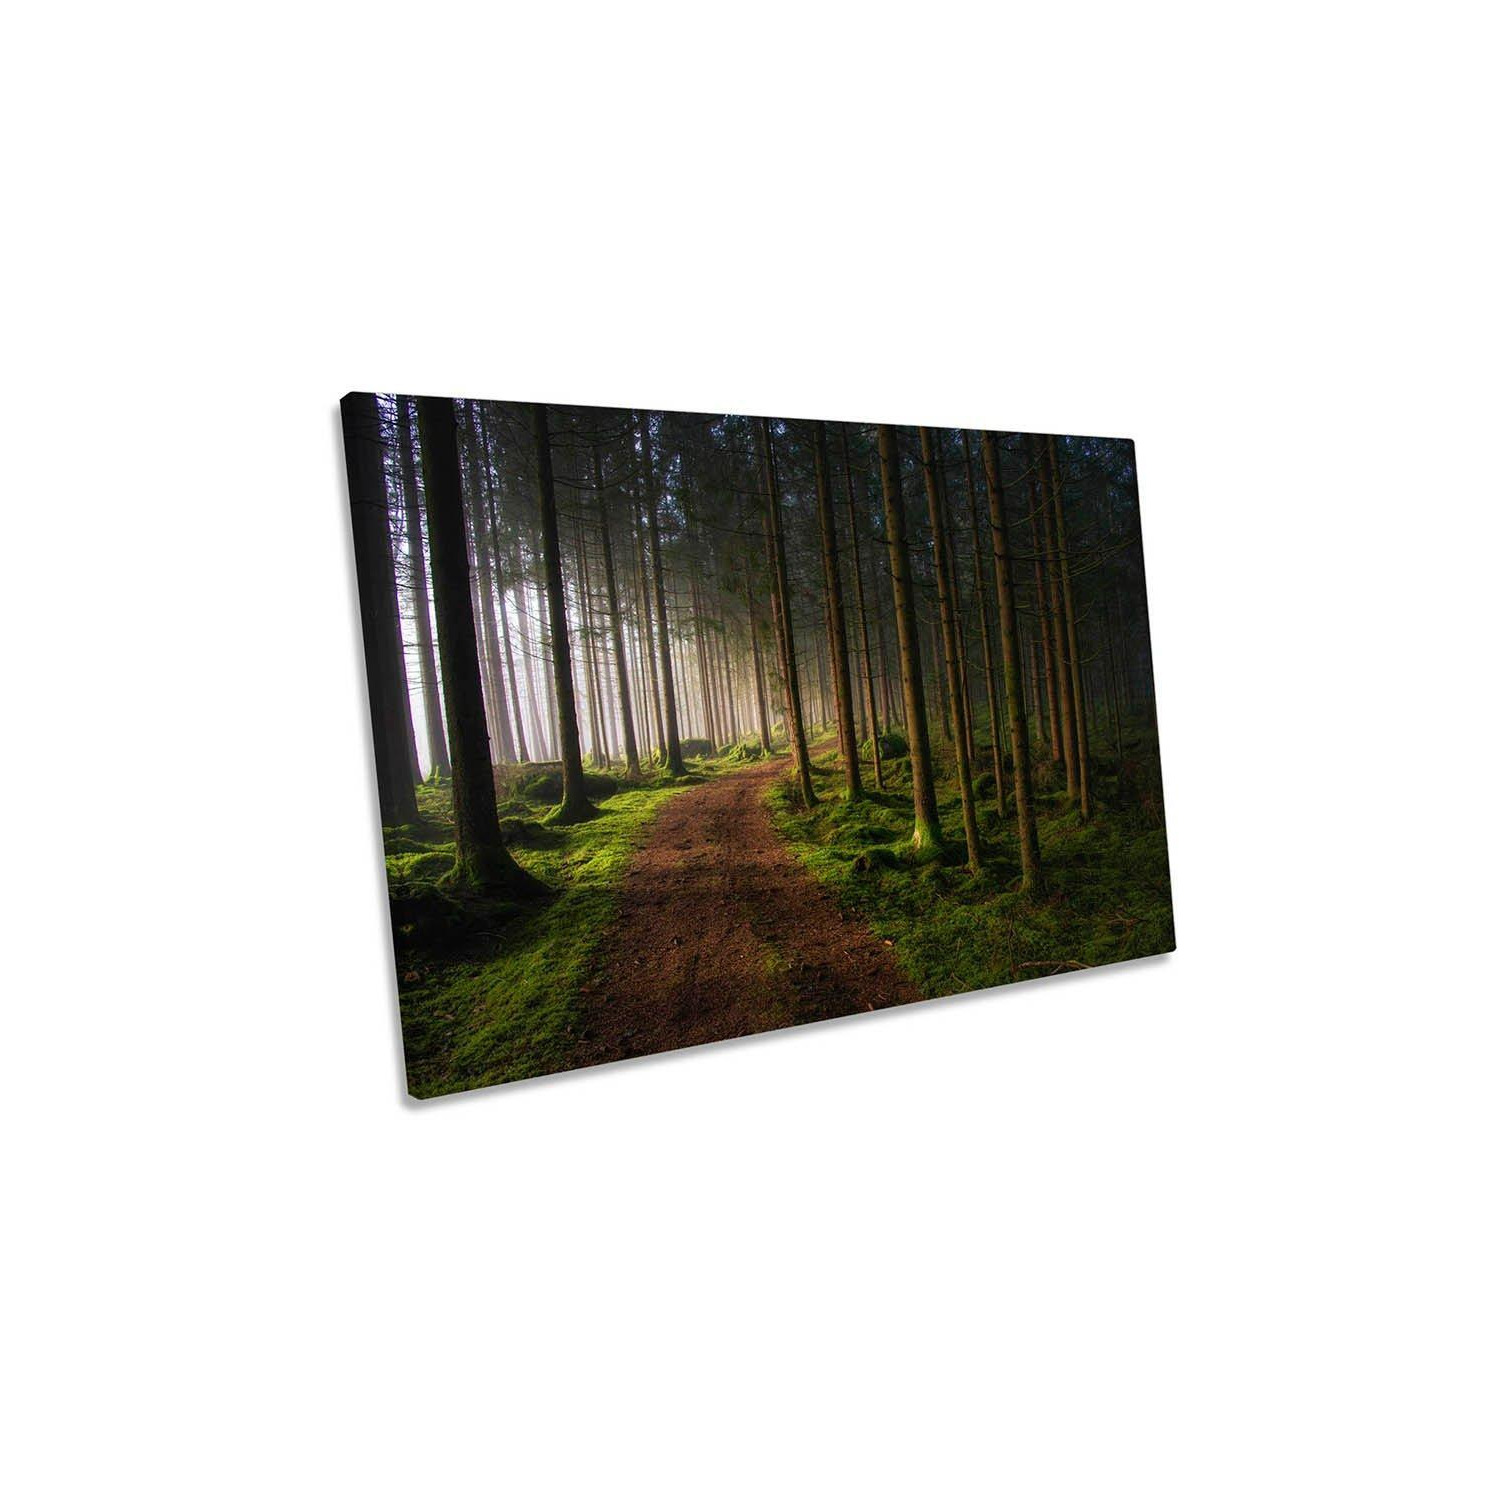 The Awakening Forest Nature Green Canvas Wall Art Picture Print - image 1